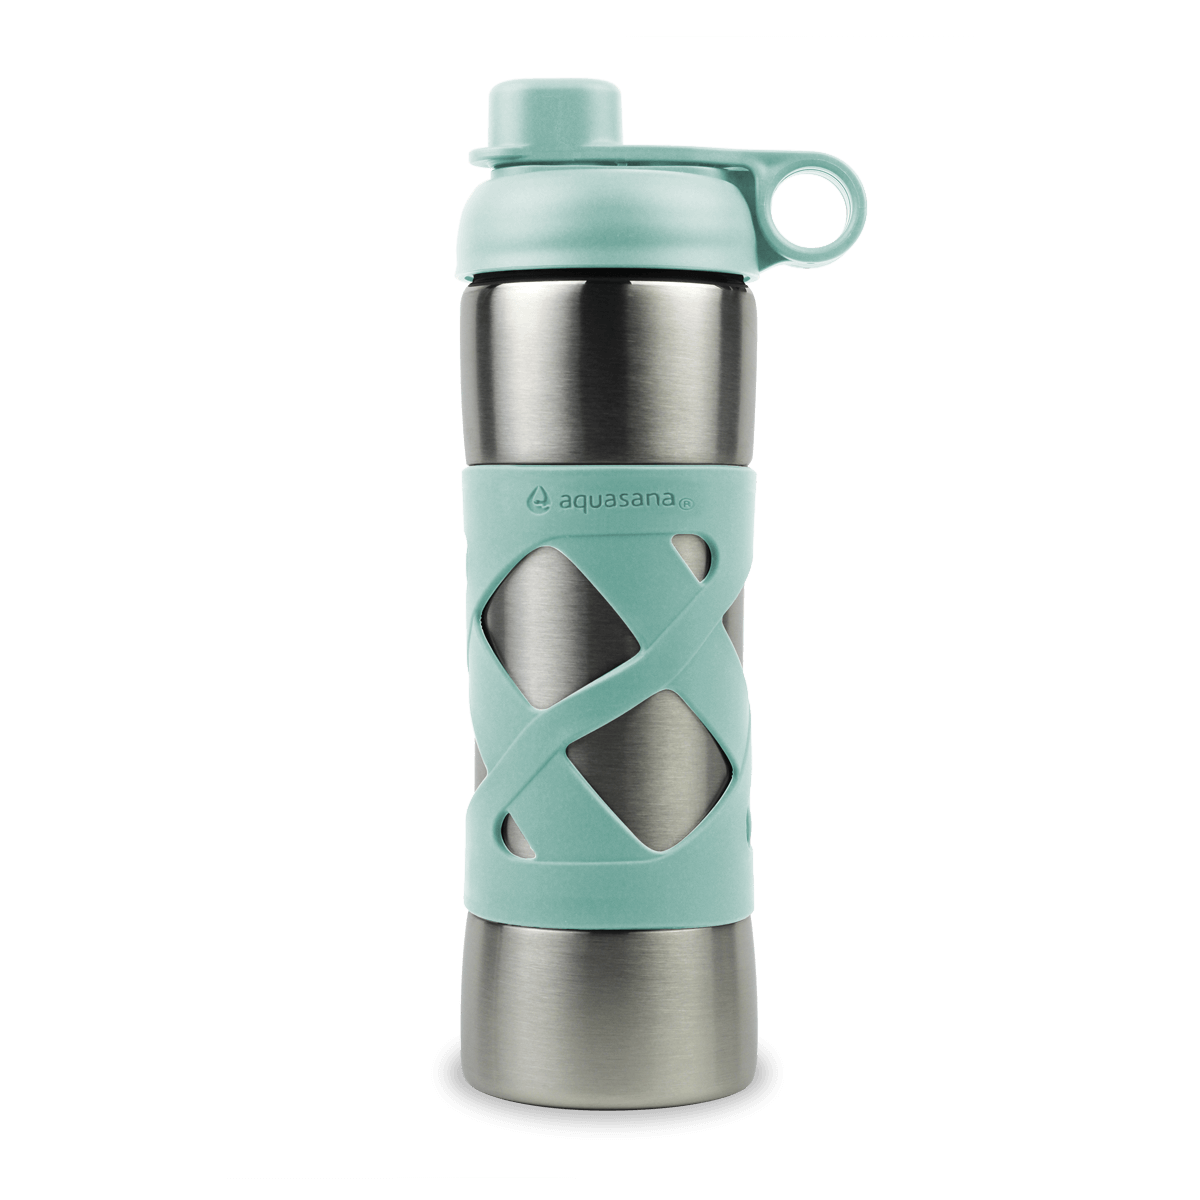 Aquasana Stainless Steel Insulated Water Filter Bottle, Glacier